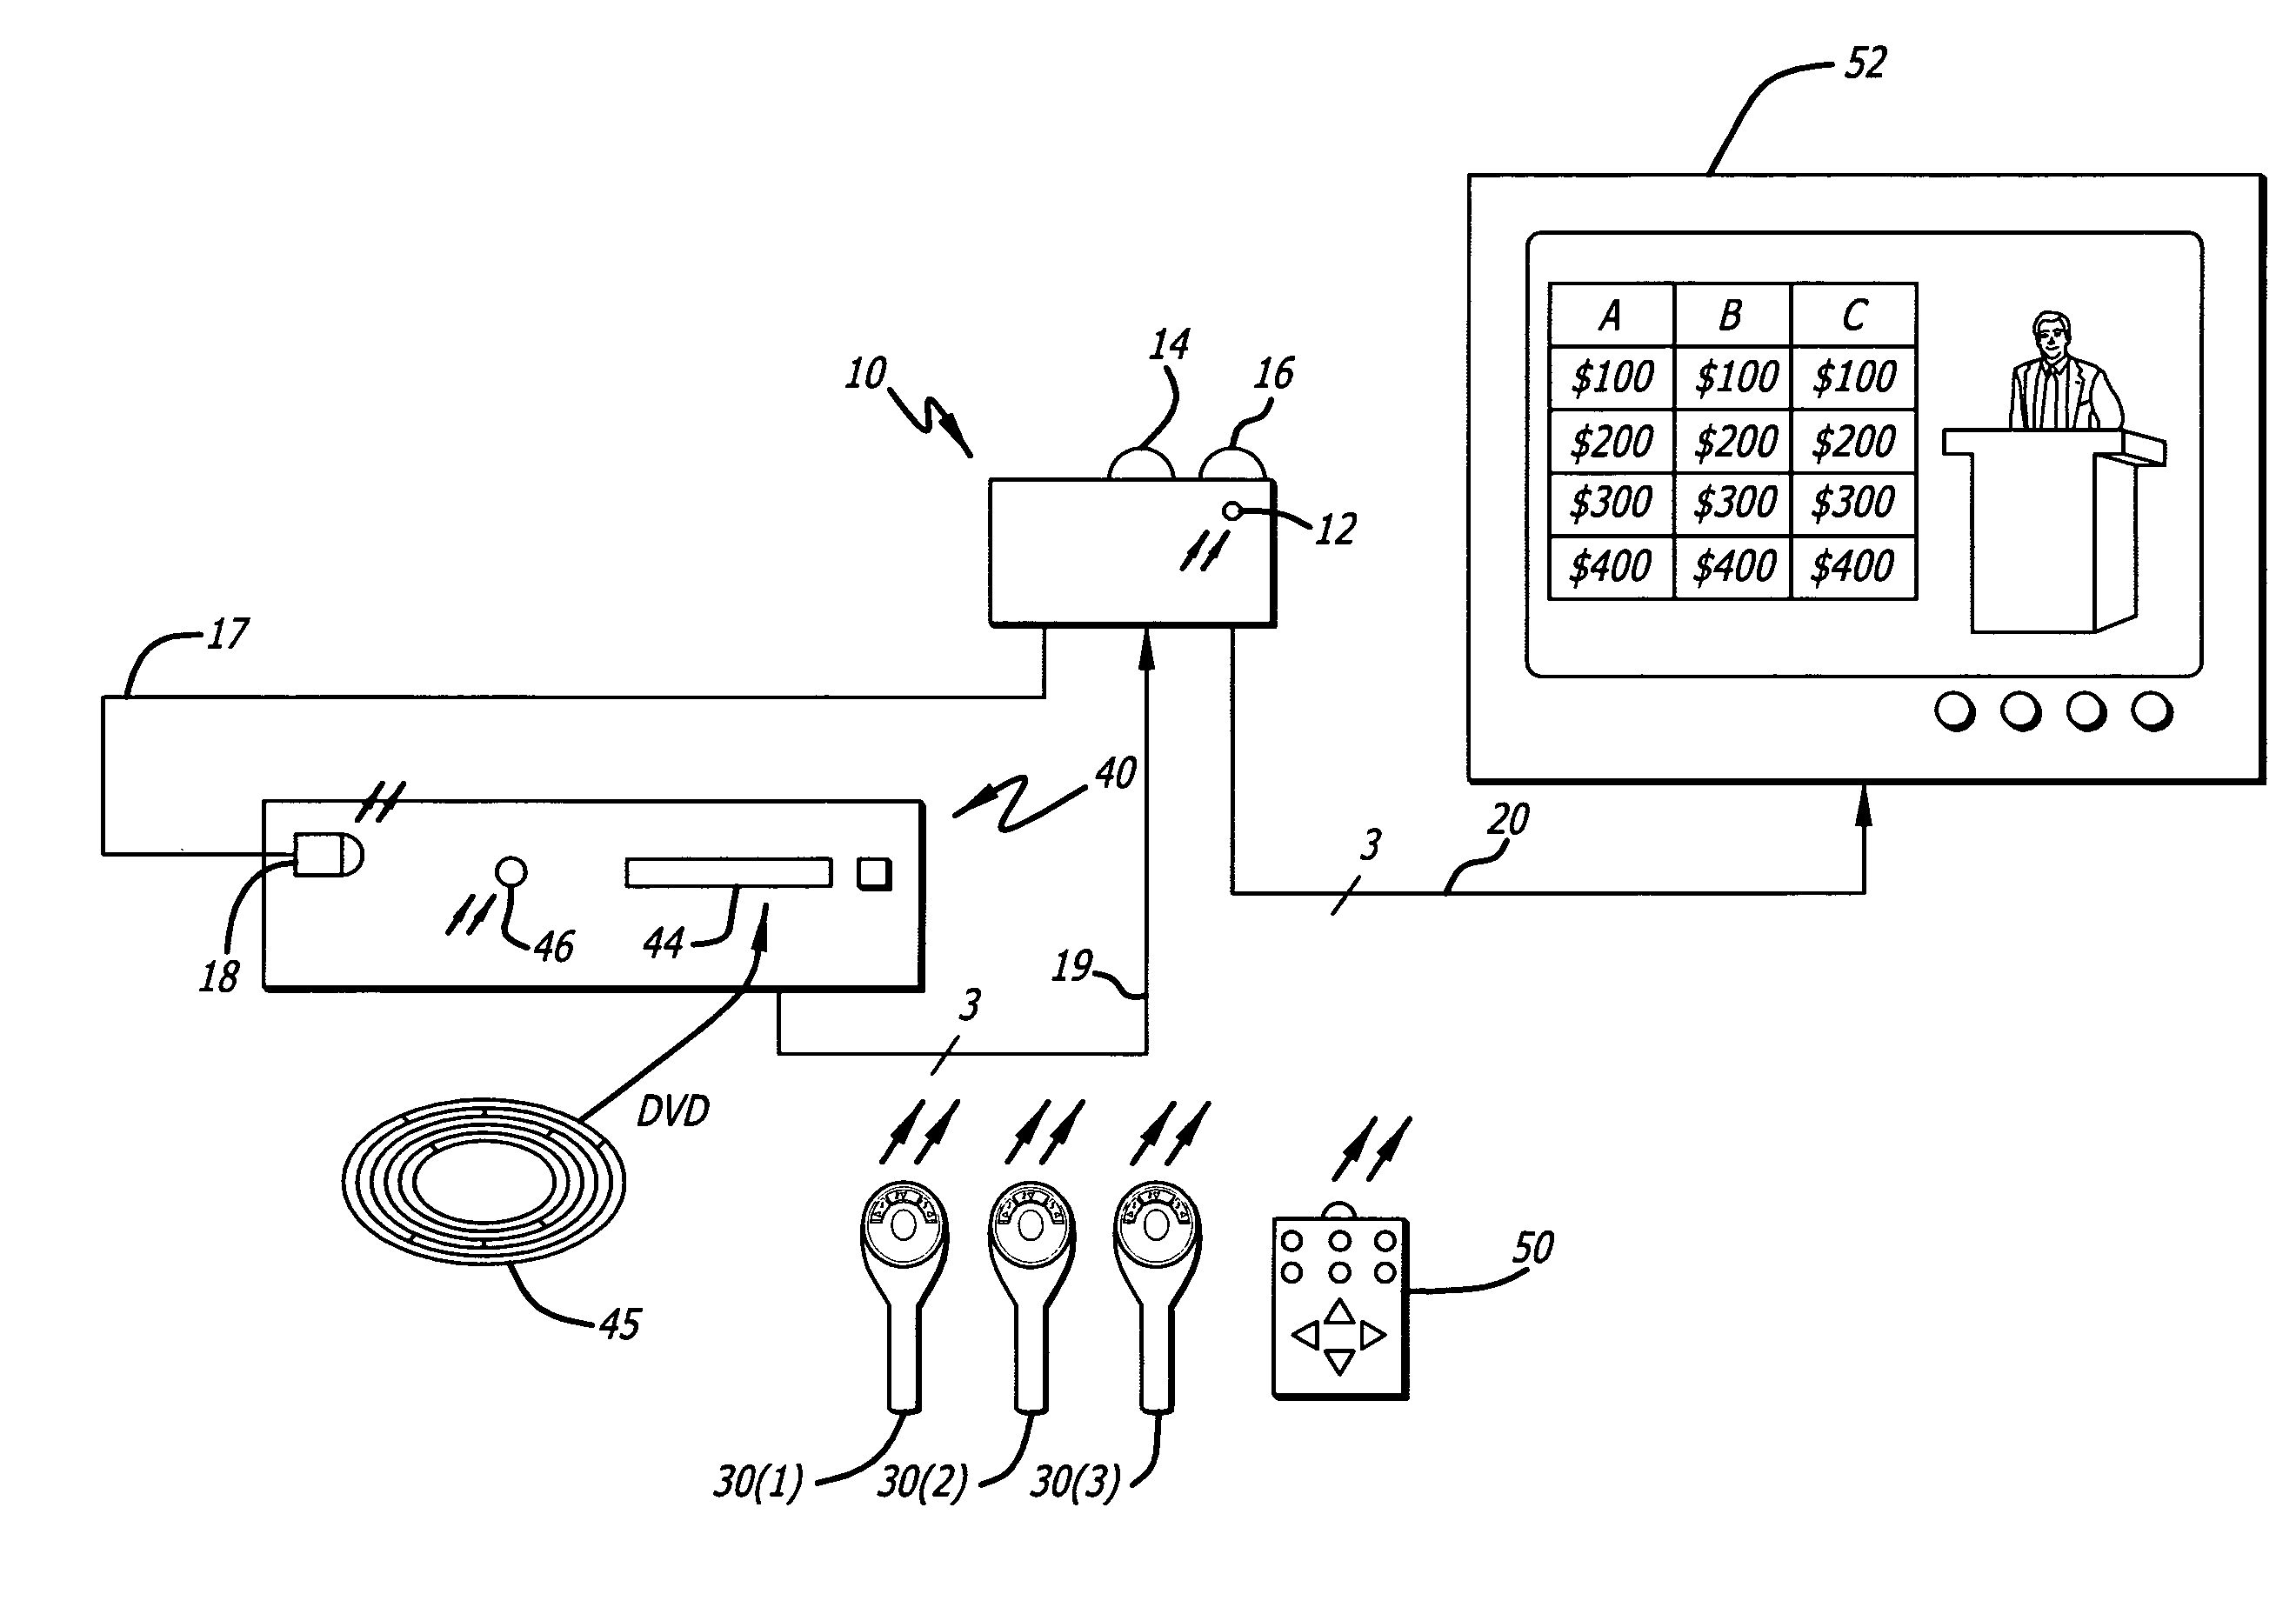 Interactive game system using game data encoded within a video signal